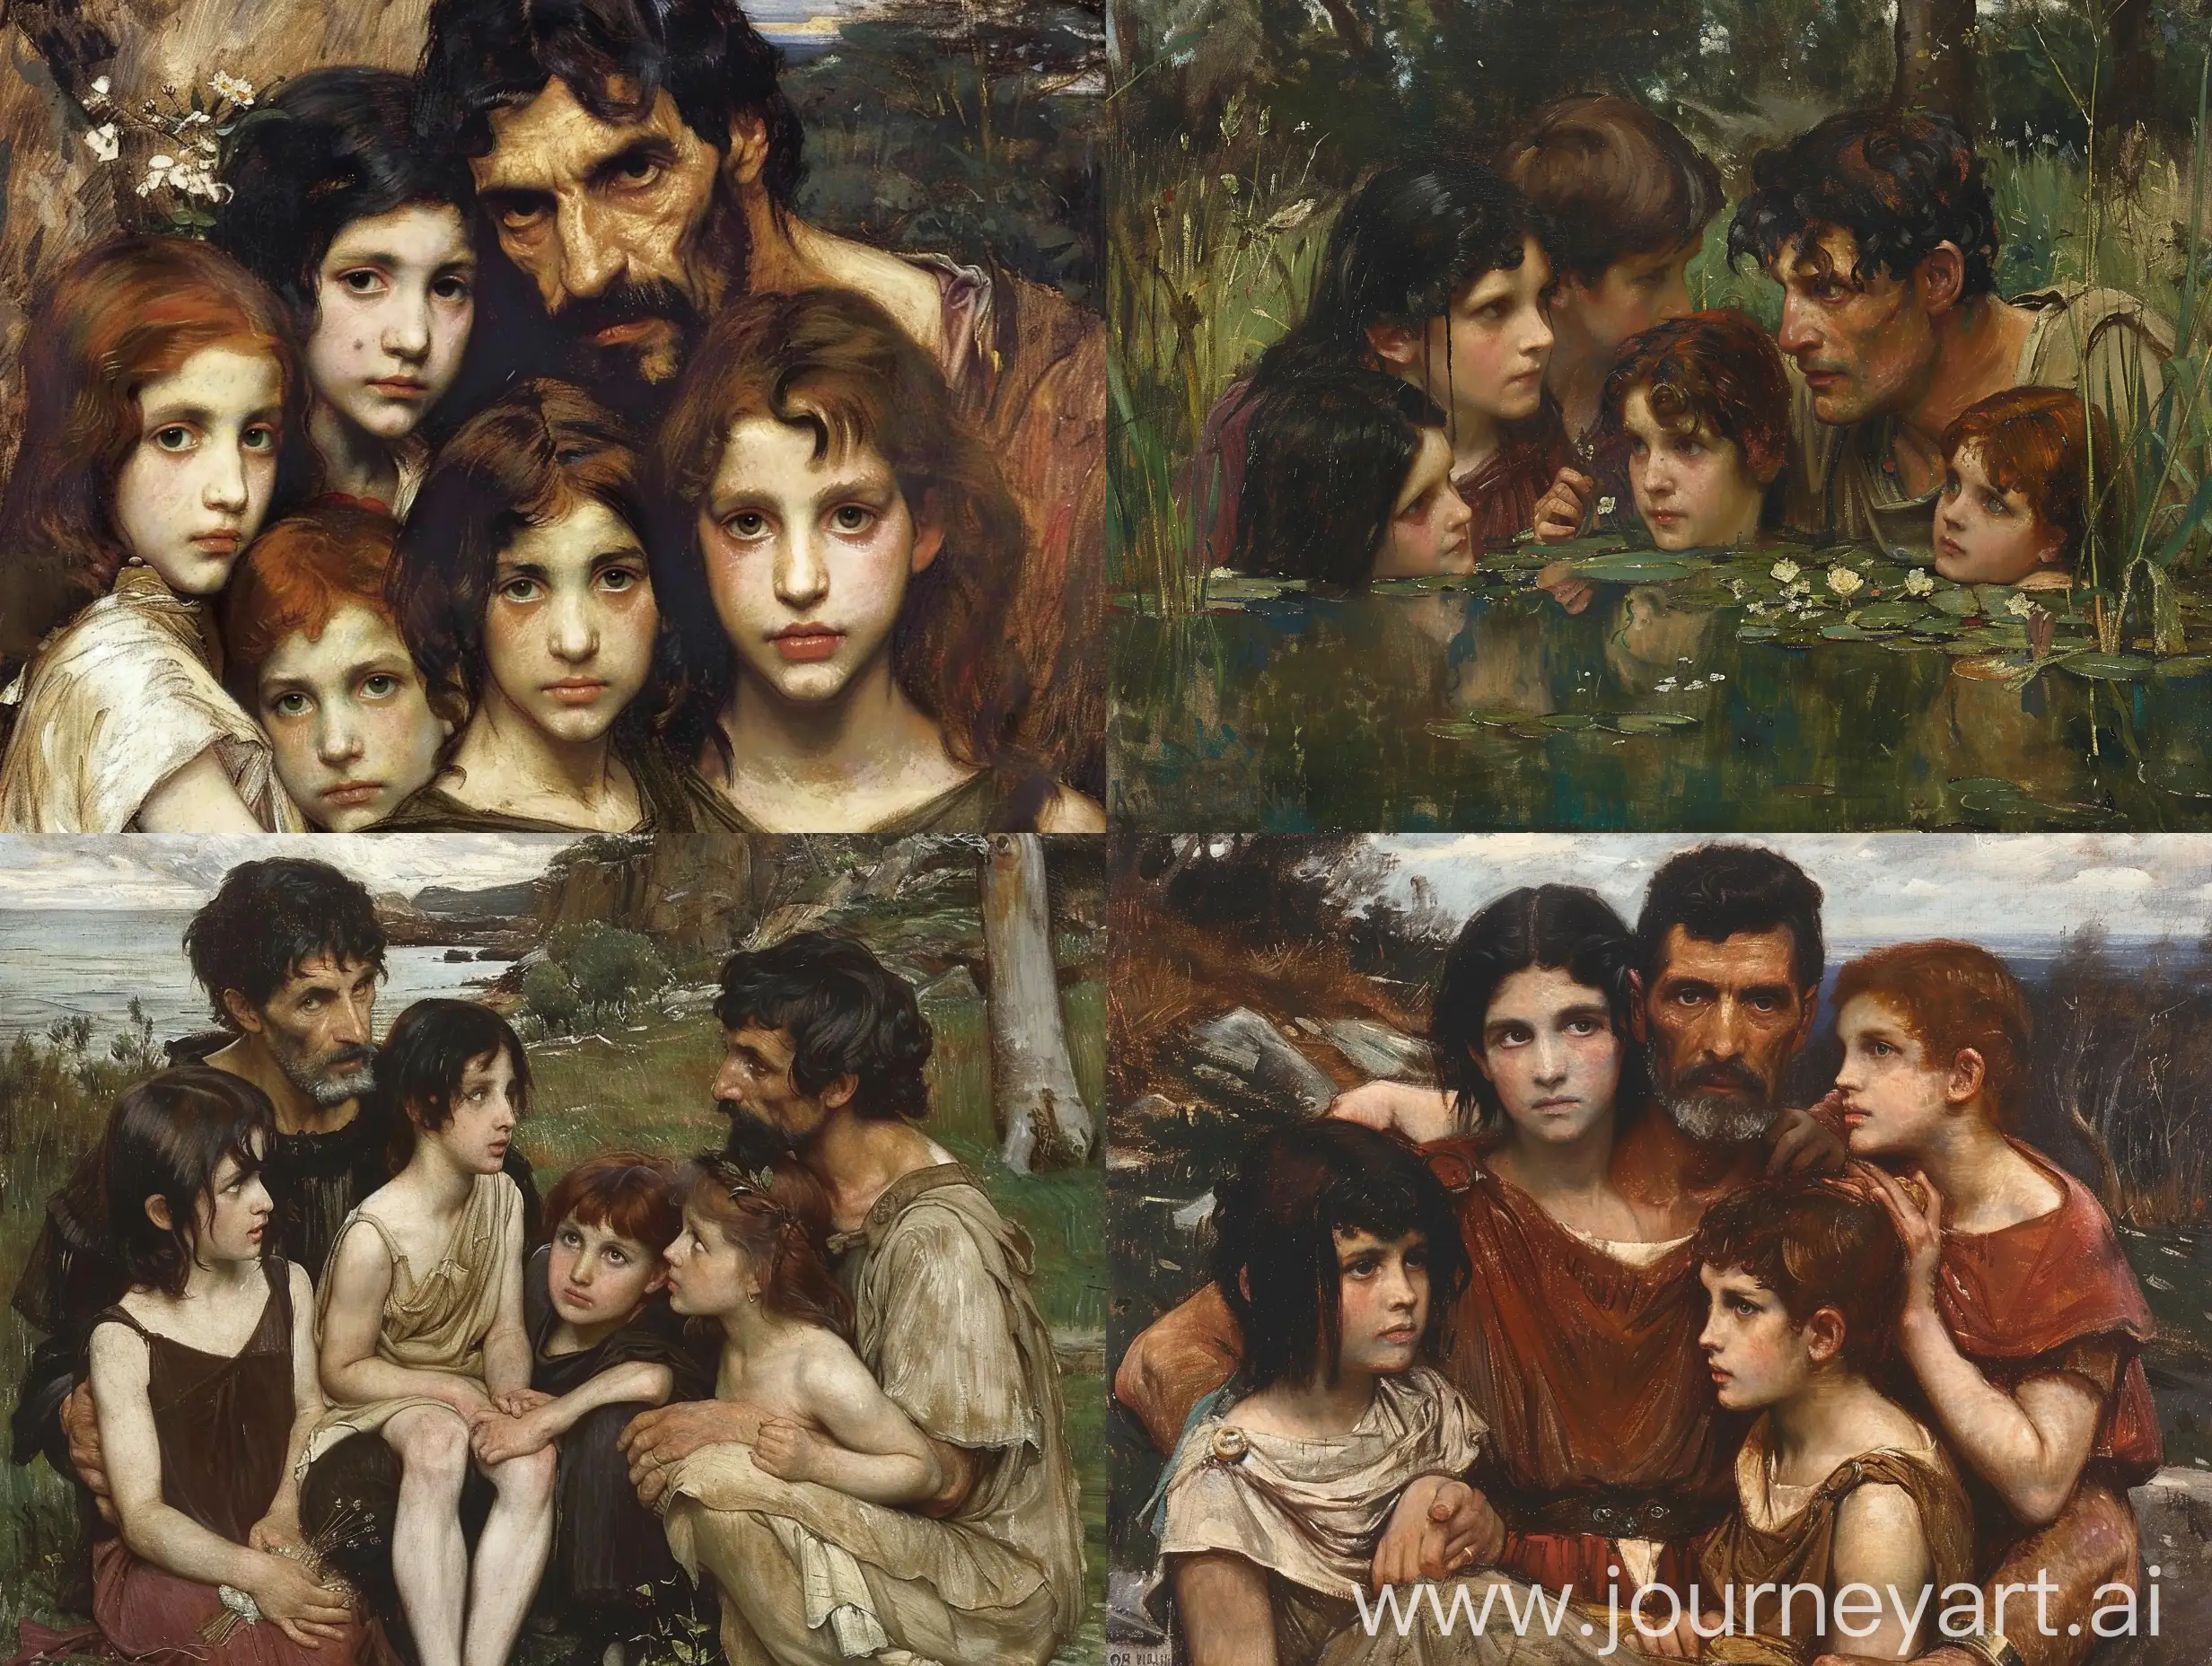 A John William Waterhouse painting of Greek mythology. It Shows Agamemnon with his for children. His oldest two, the Iphigenie and Chrysothemis, have Black hair, the younger ones, Electra and Orestes, have ruddish brown hair like their father Agamemnon.